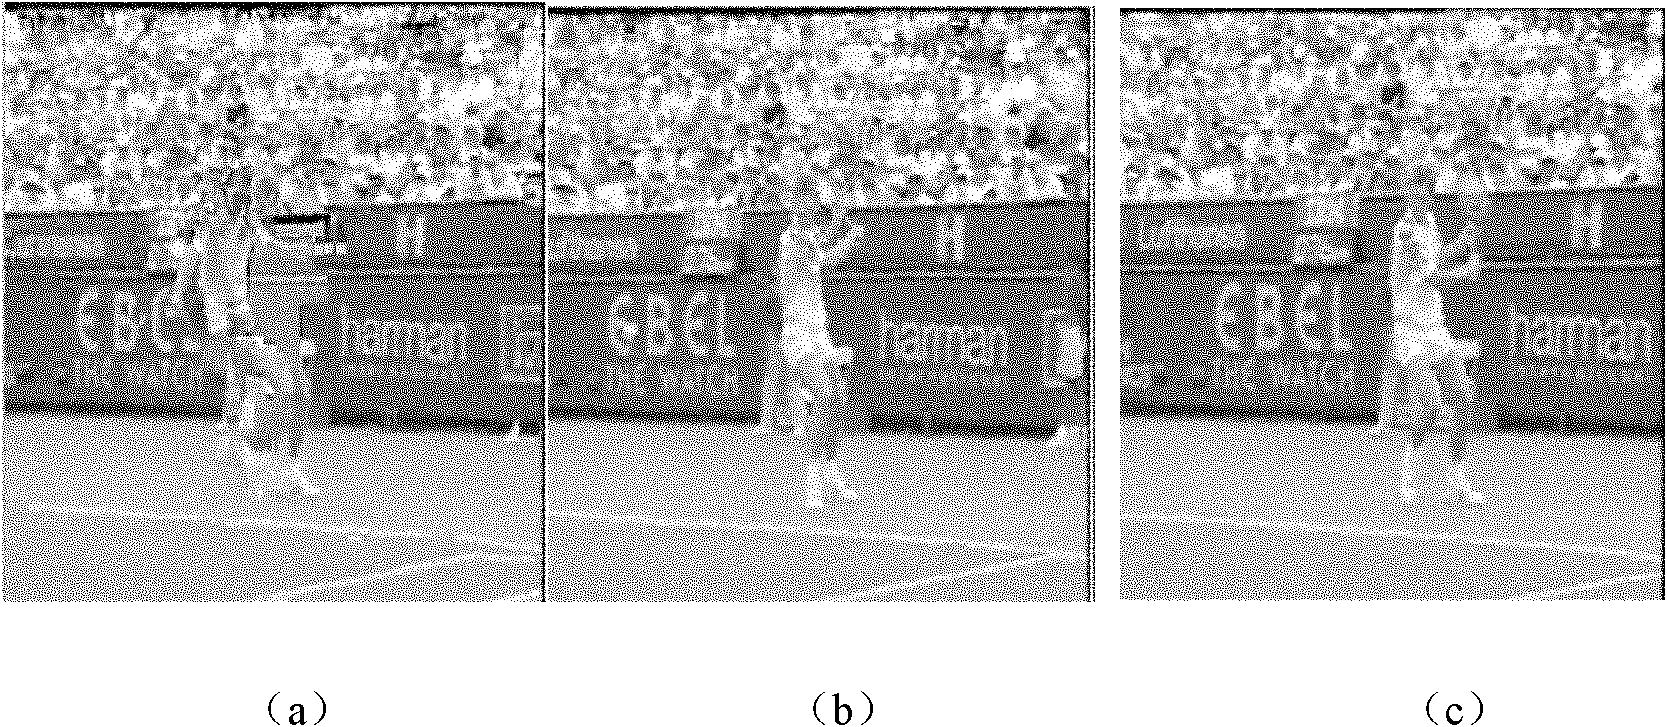 Video service quality-based hybrid selective repeat method